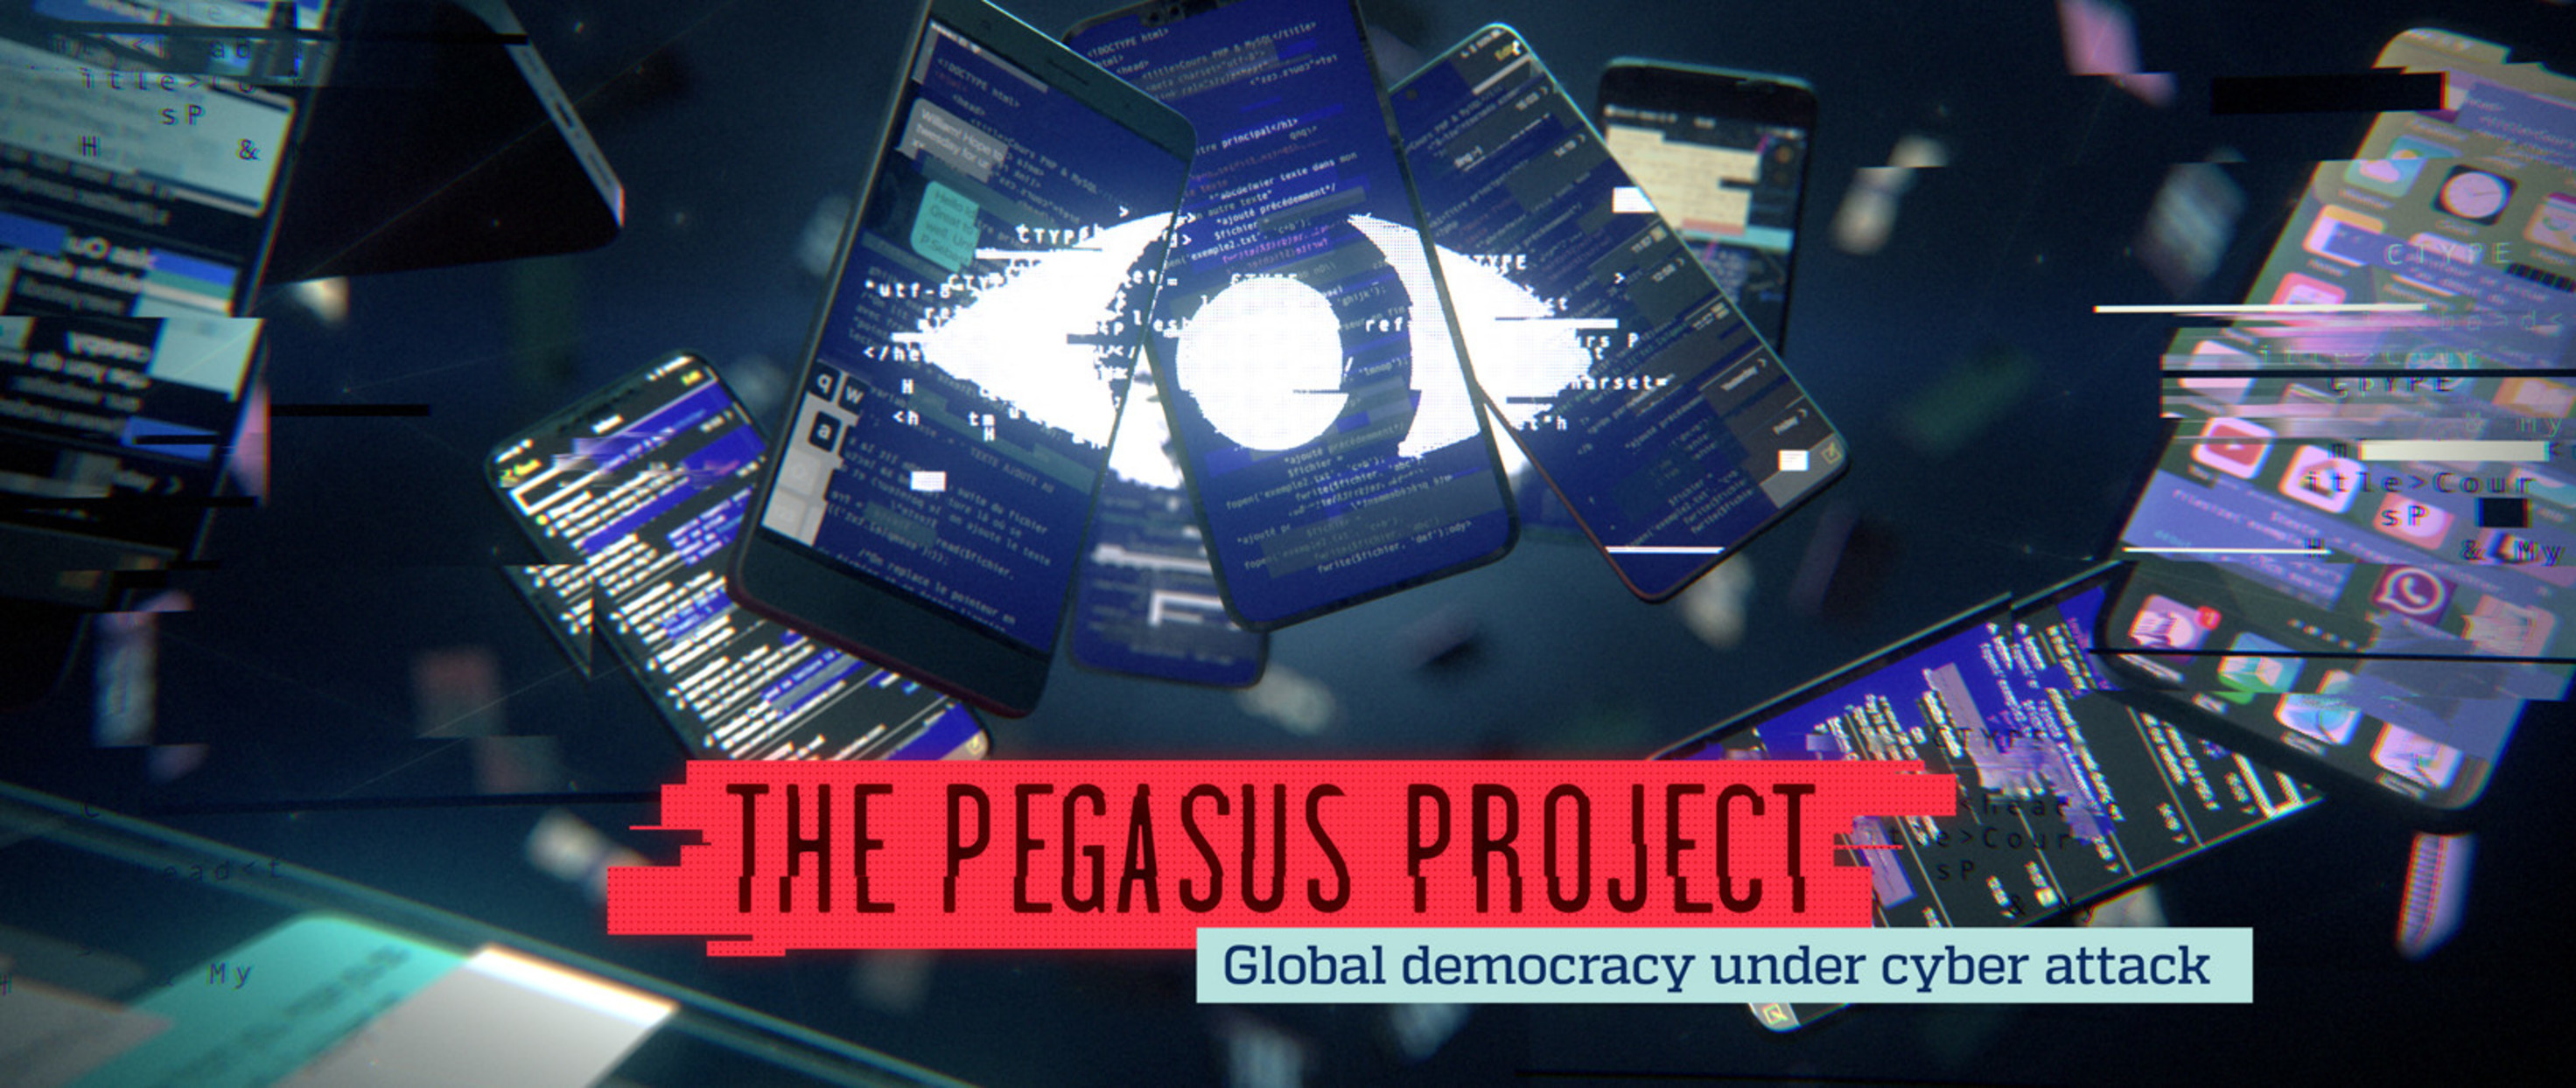 Pegasus Project: massive data leak reveals Israeli NSO group's spyware used to target activists, journalists, and political leaders globally | Amnesty International UK